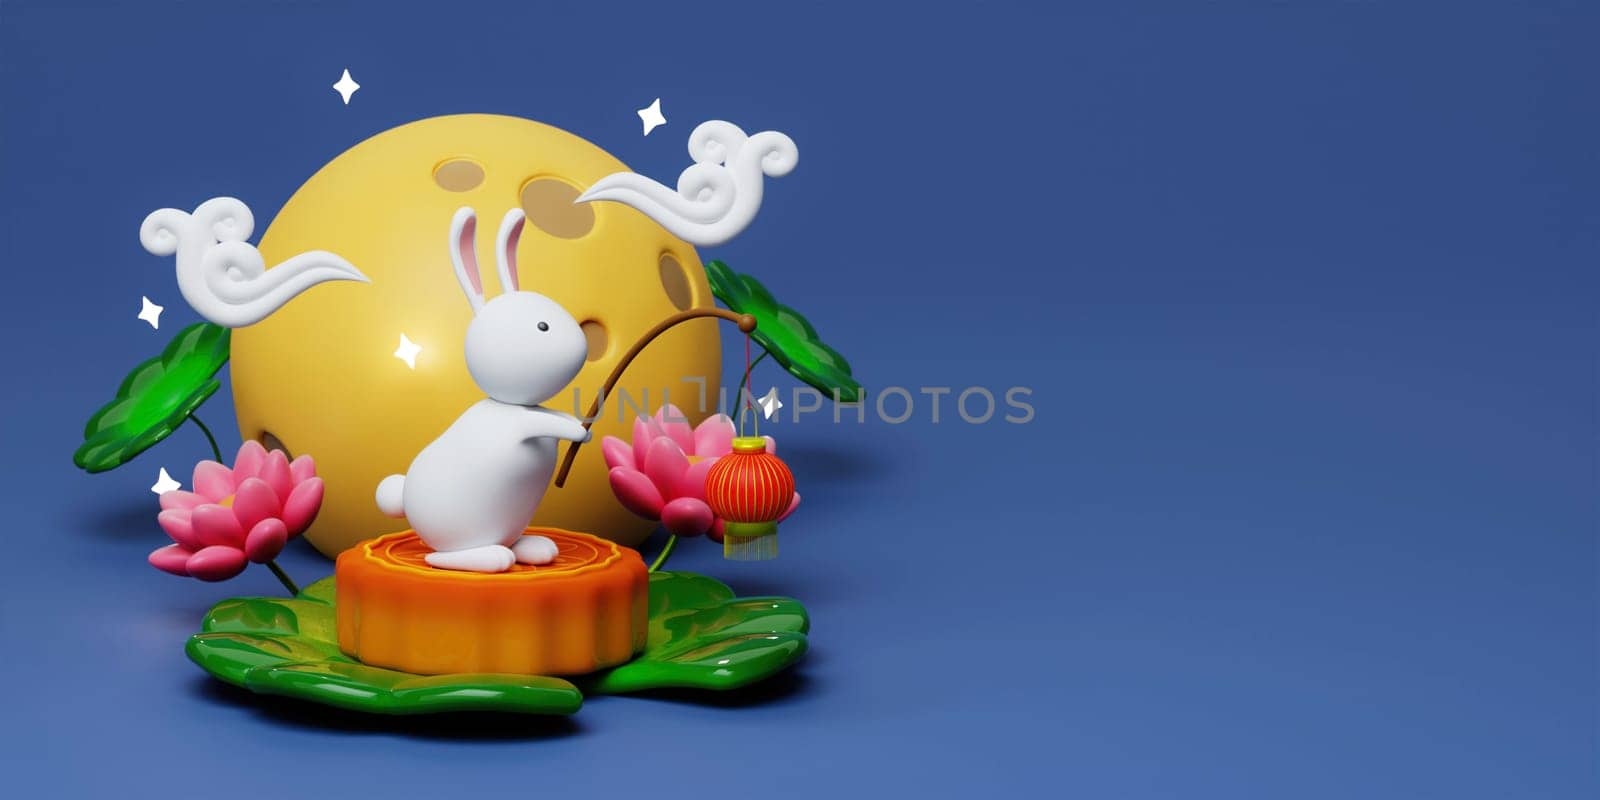 3d Rabbit holding lanterns on baked mooncake with lotus, full moon on night background. Chinese palace aside. Translation: Happy mid autumn festival. 3d render by meepiangraphic